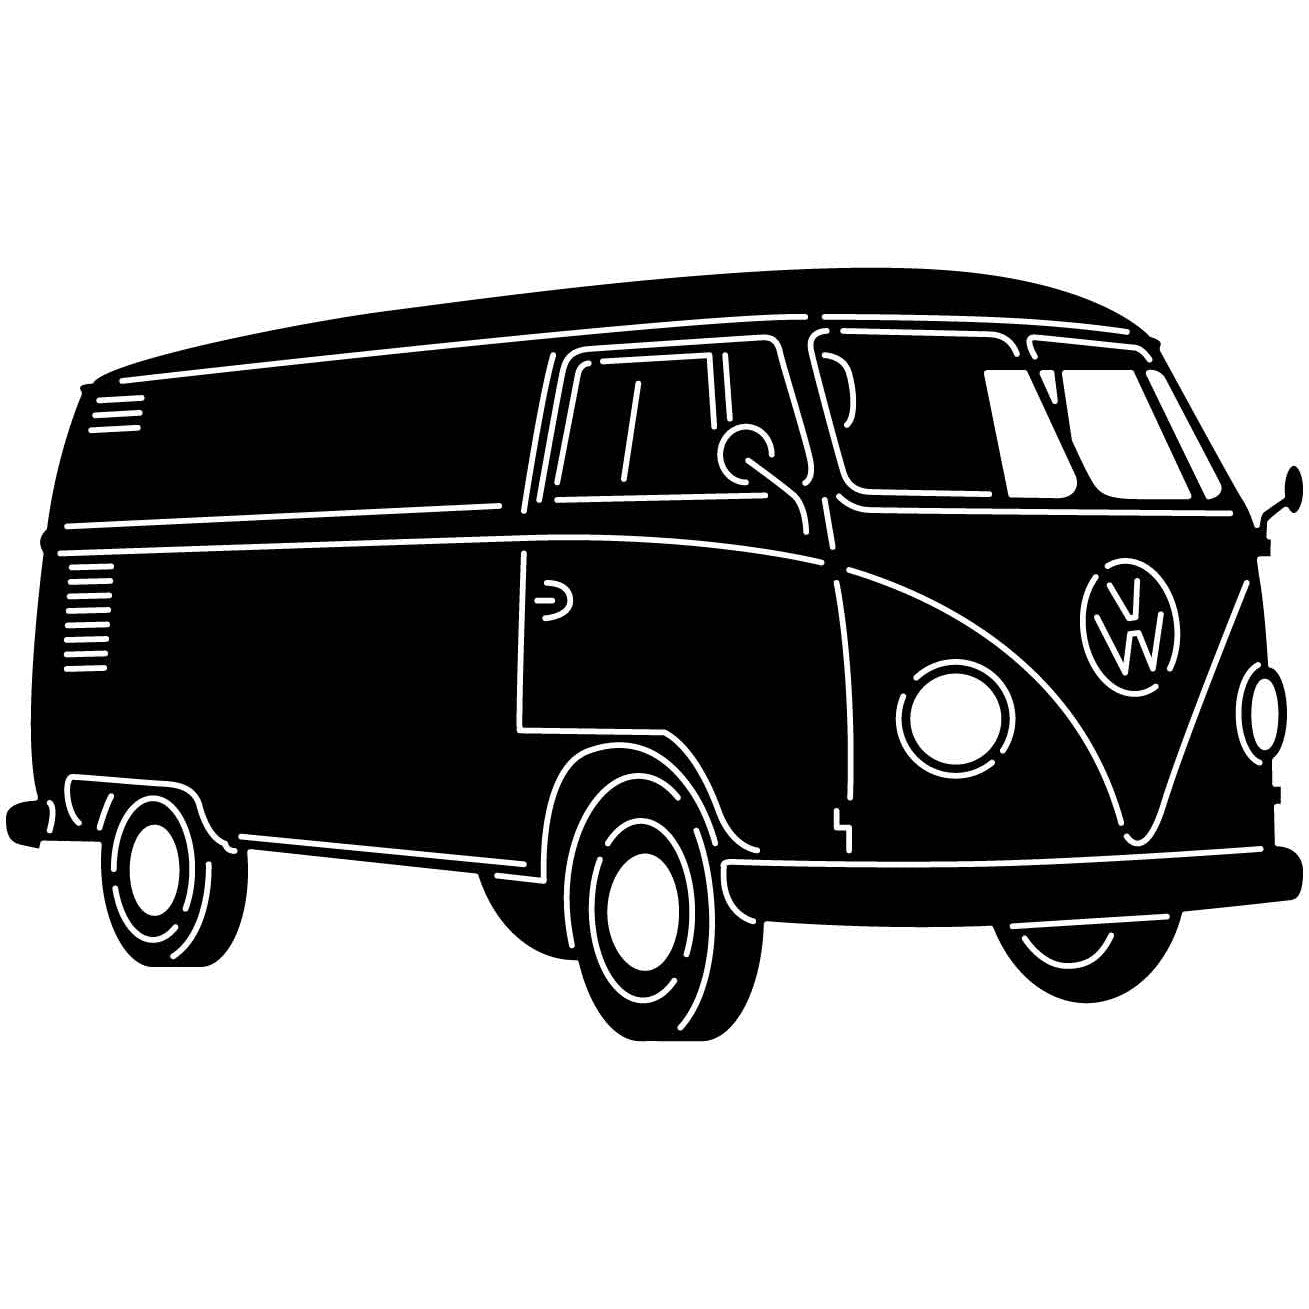 VW Combi 05 DXF File Cut Ready for CNC